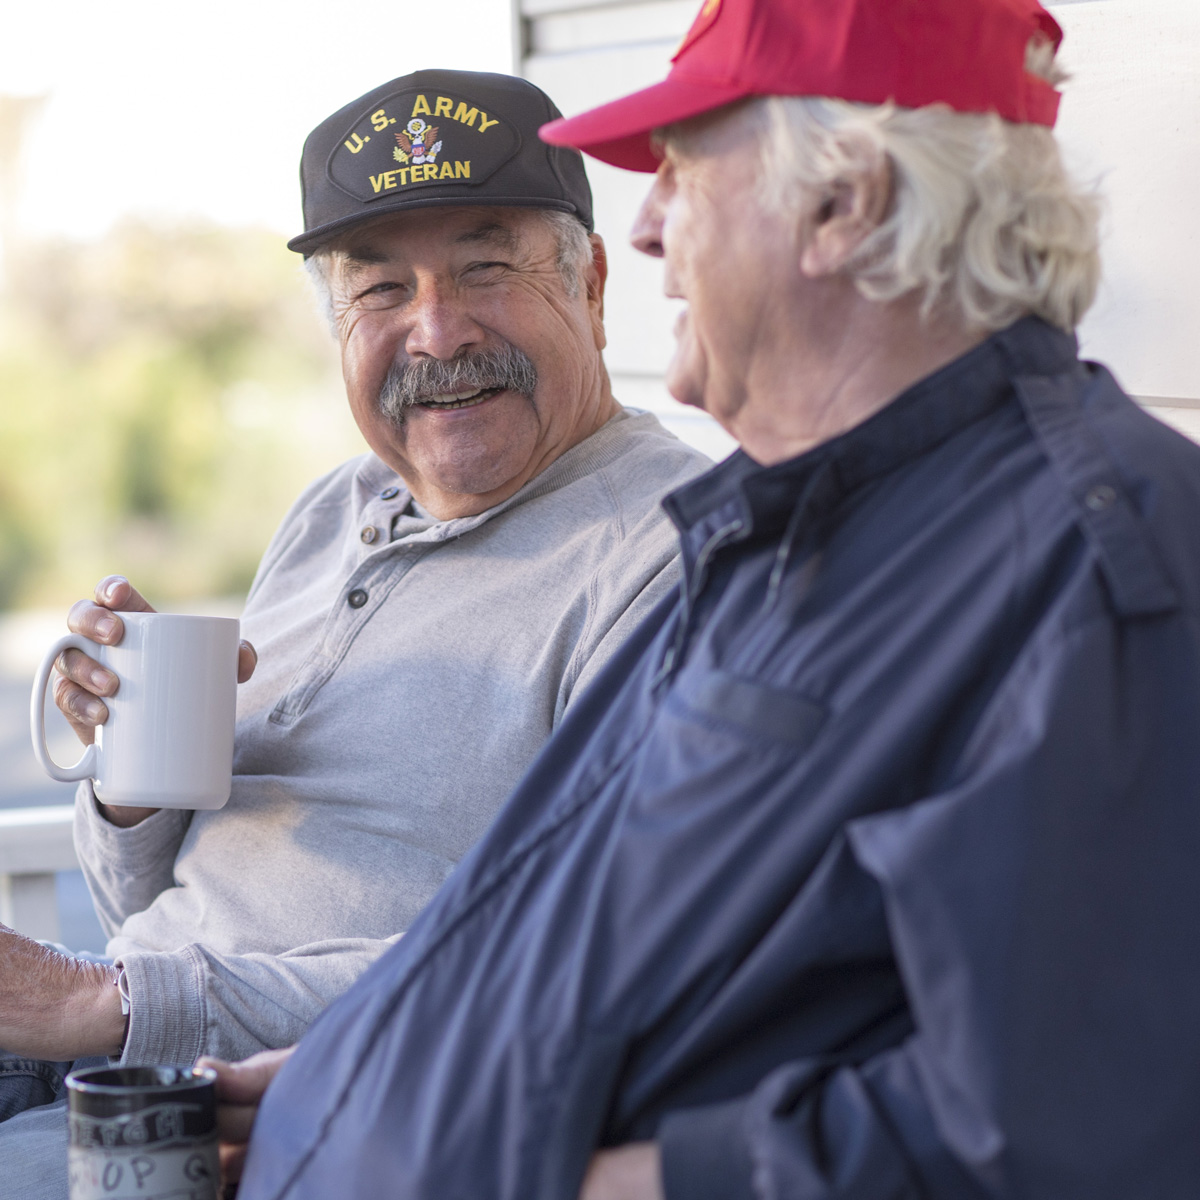 Two men with coffee mugs